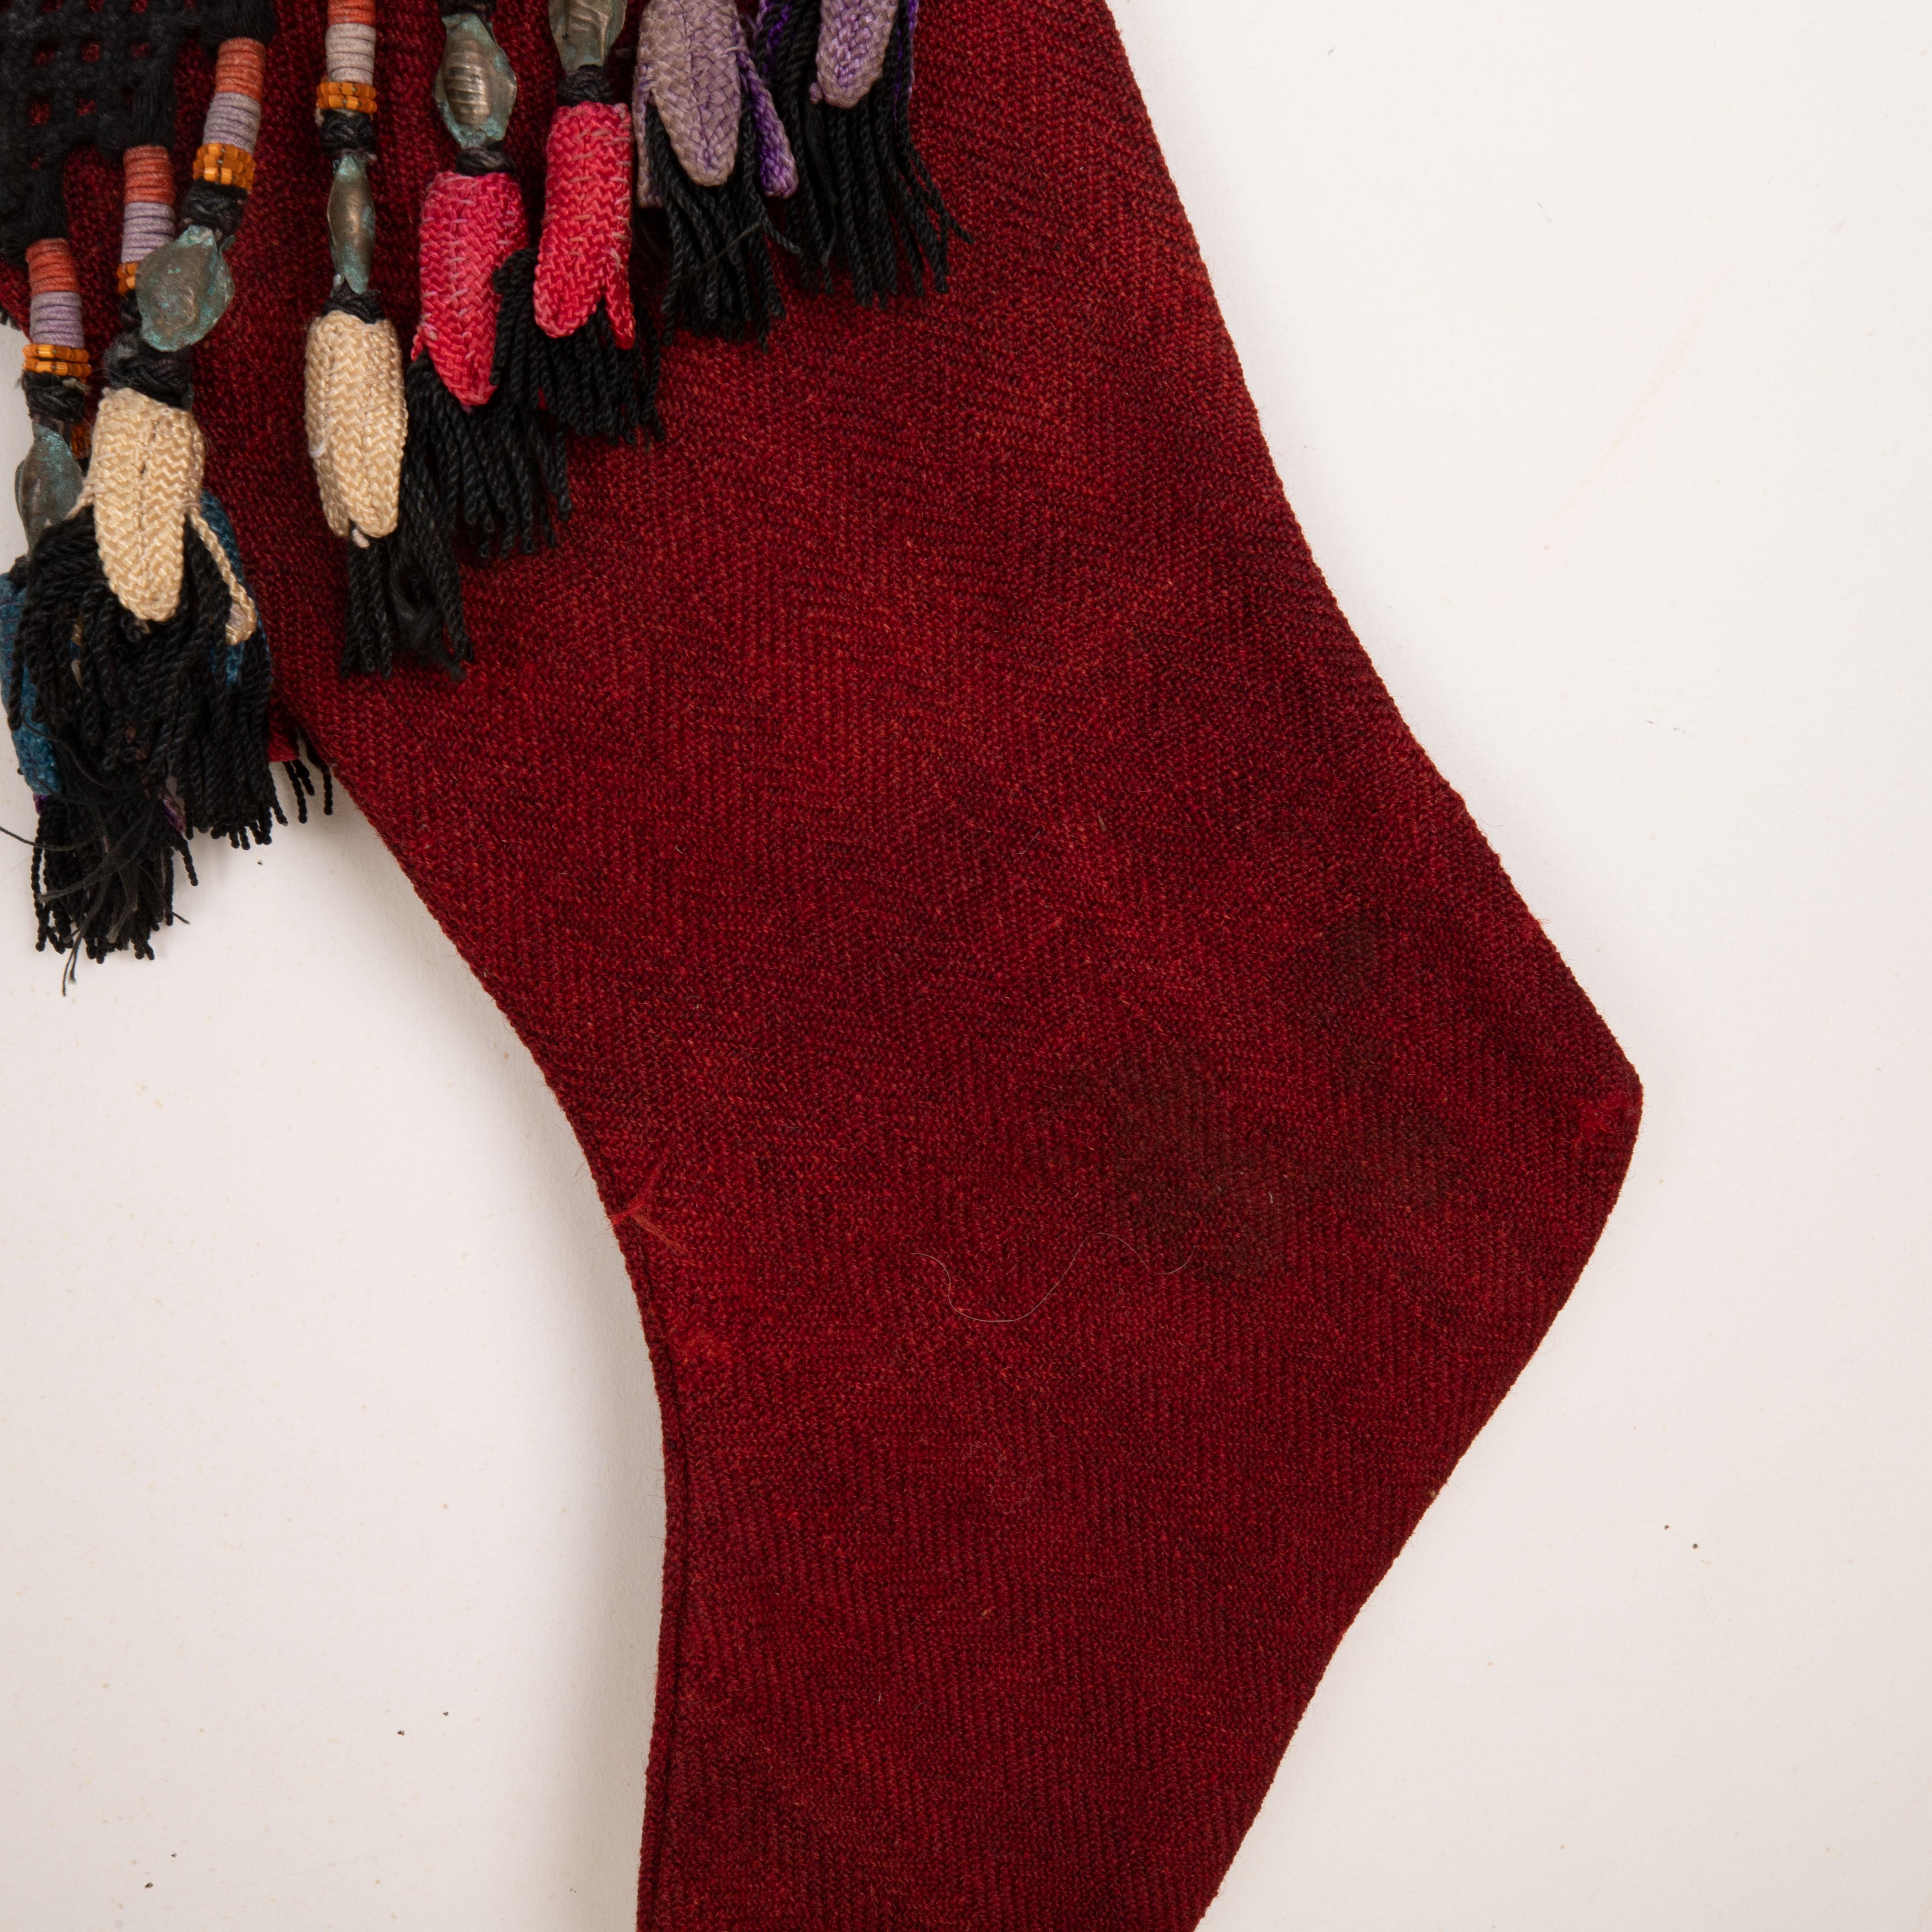 Hand-Crafted Double Sided Christmas Stockings Made from Vintage Perde Cover Fragments For Sale